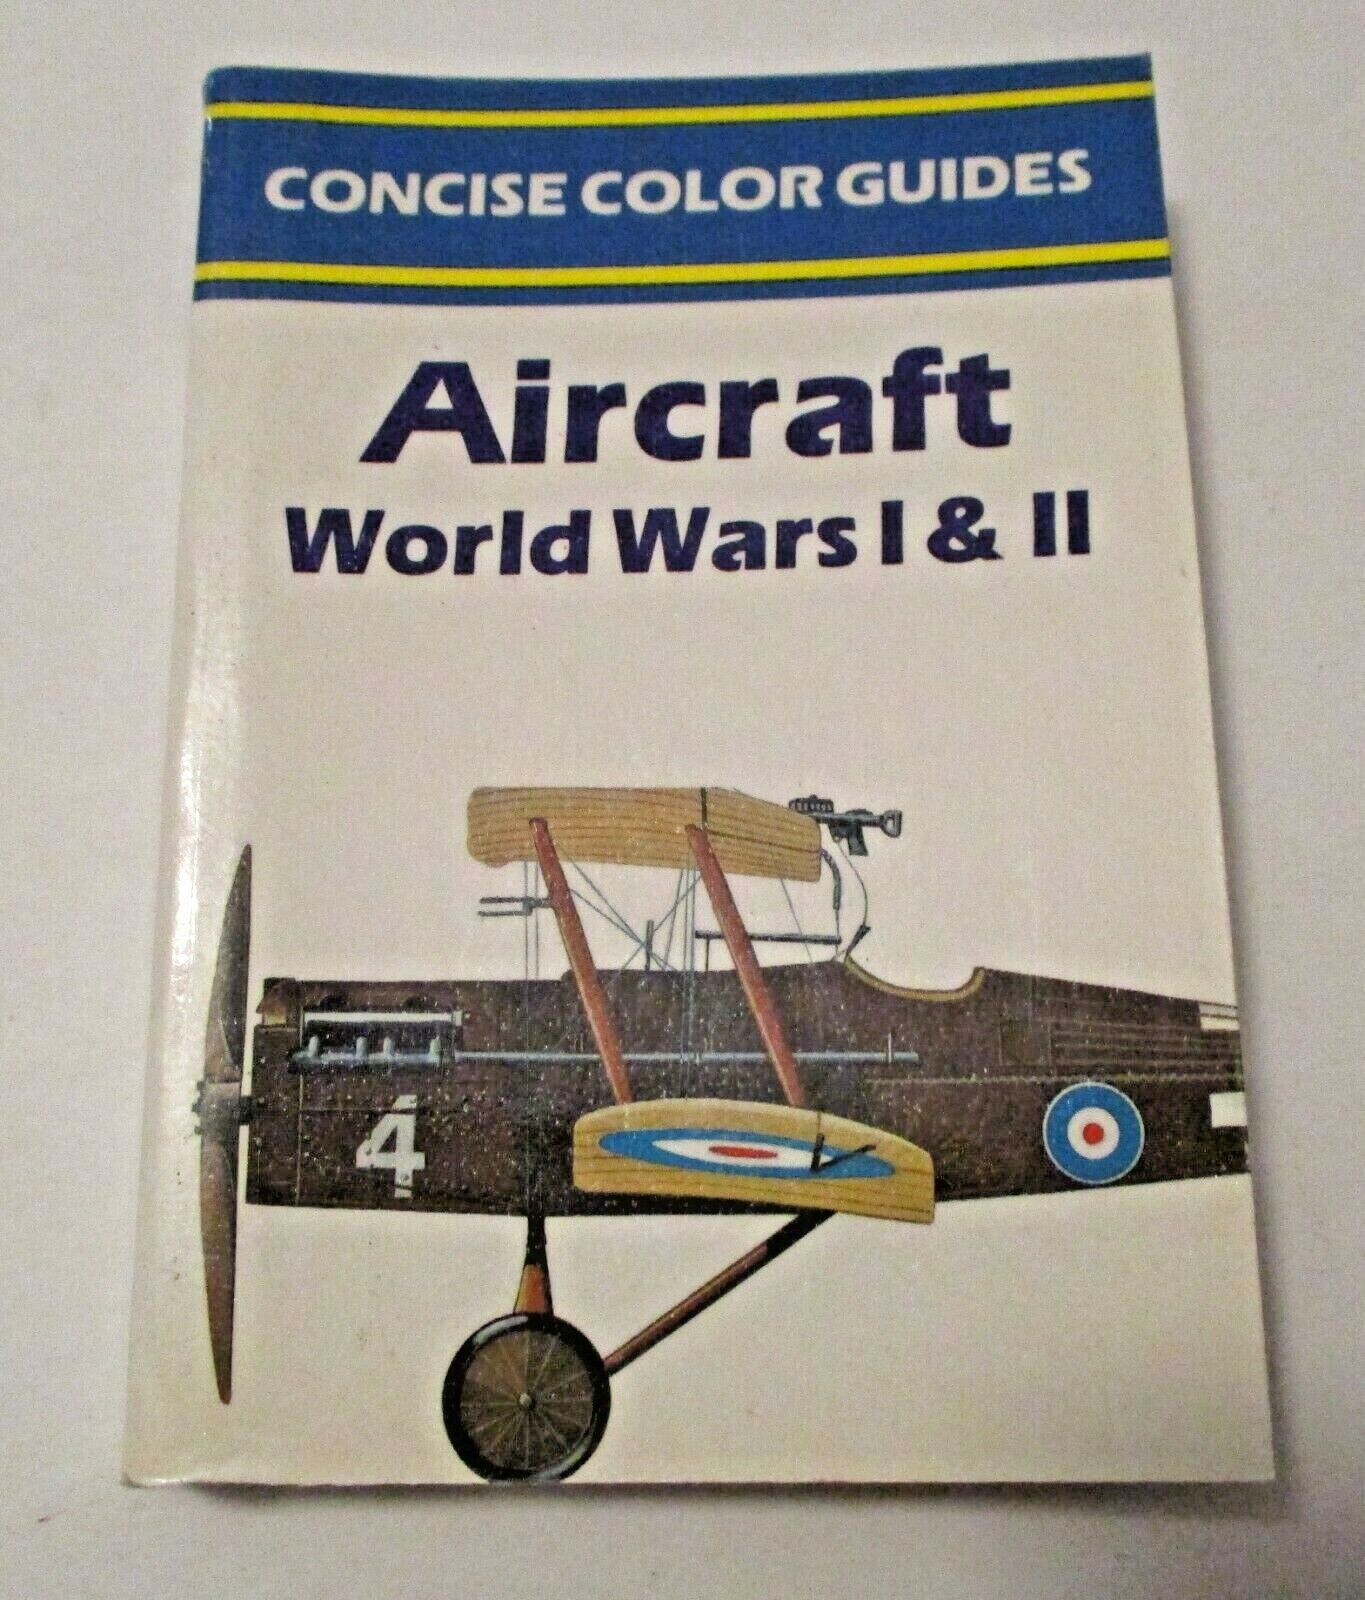 VINTAGE 1988 CONCISE COLOR GUIDES AIRCRAFT WORLD WARS I & II MILITARY BOOK